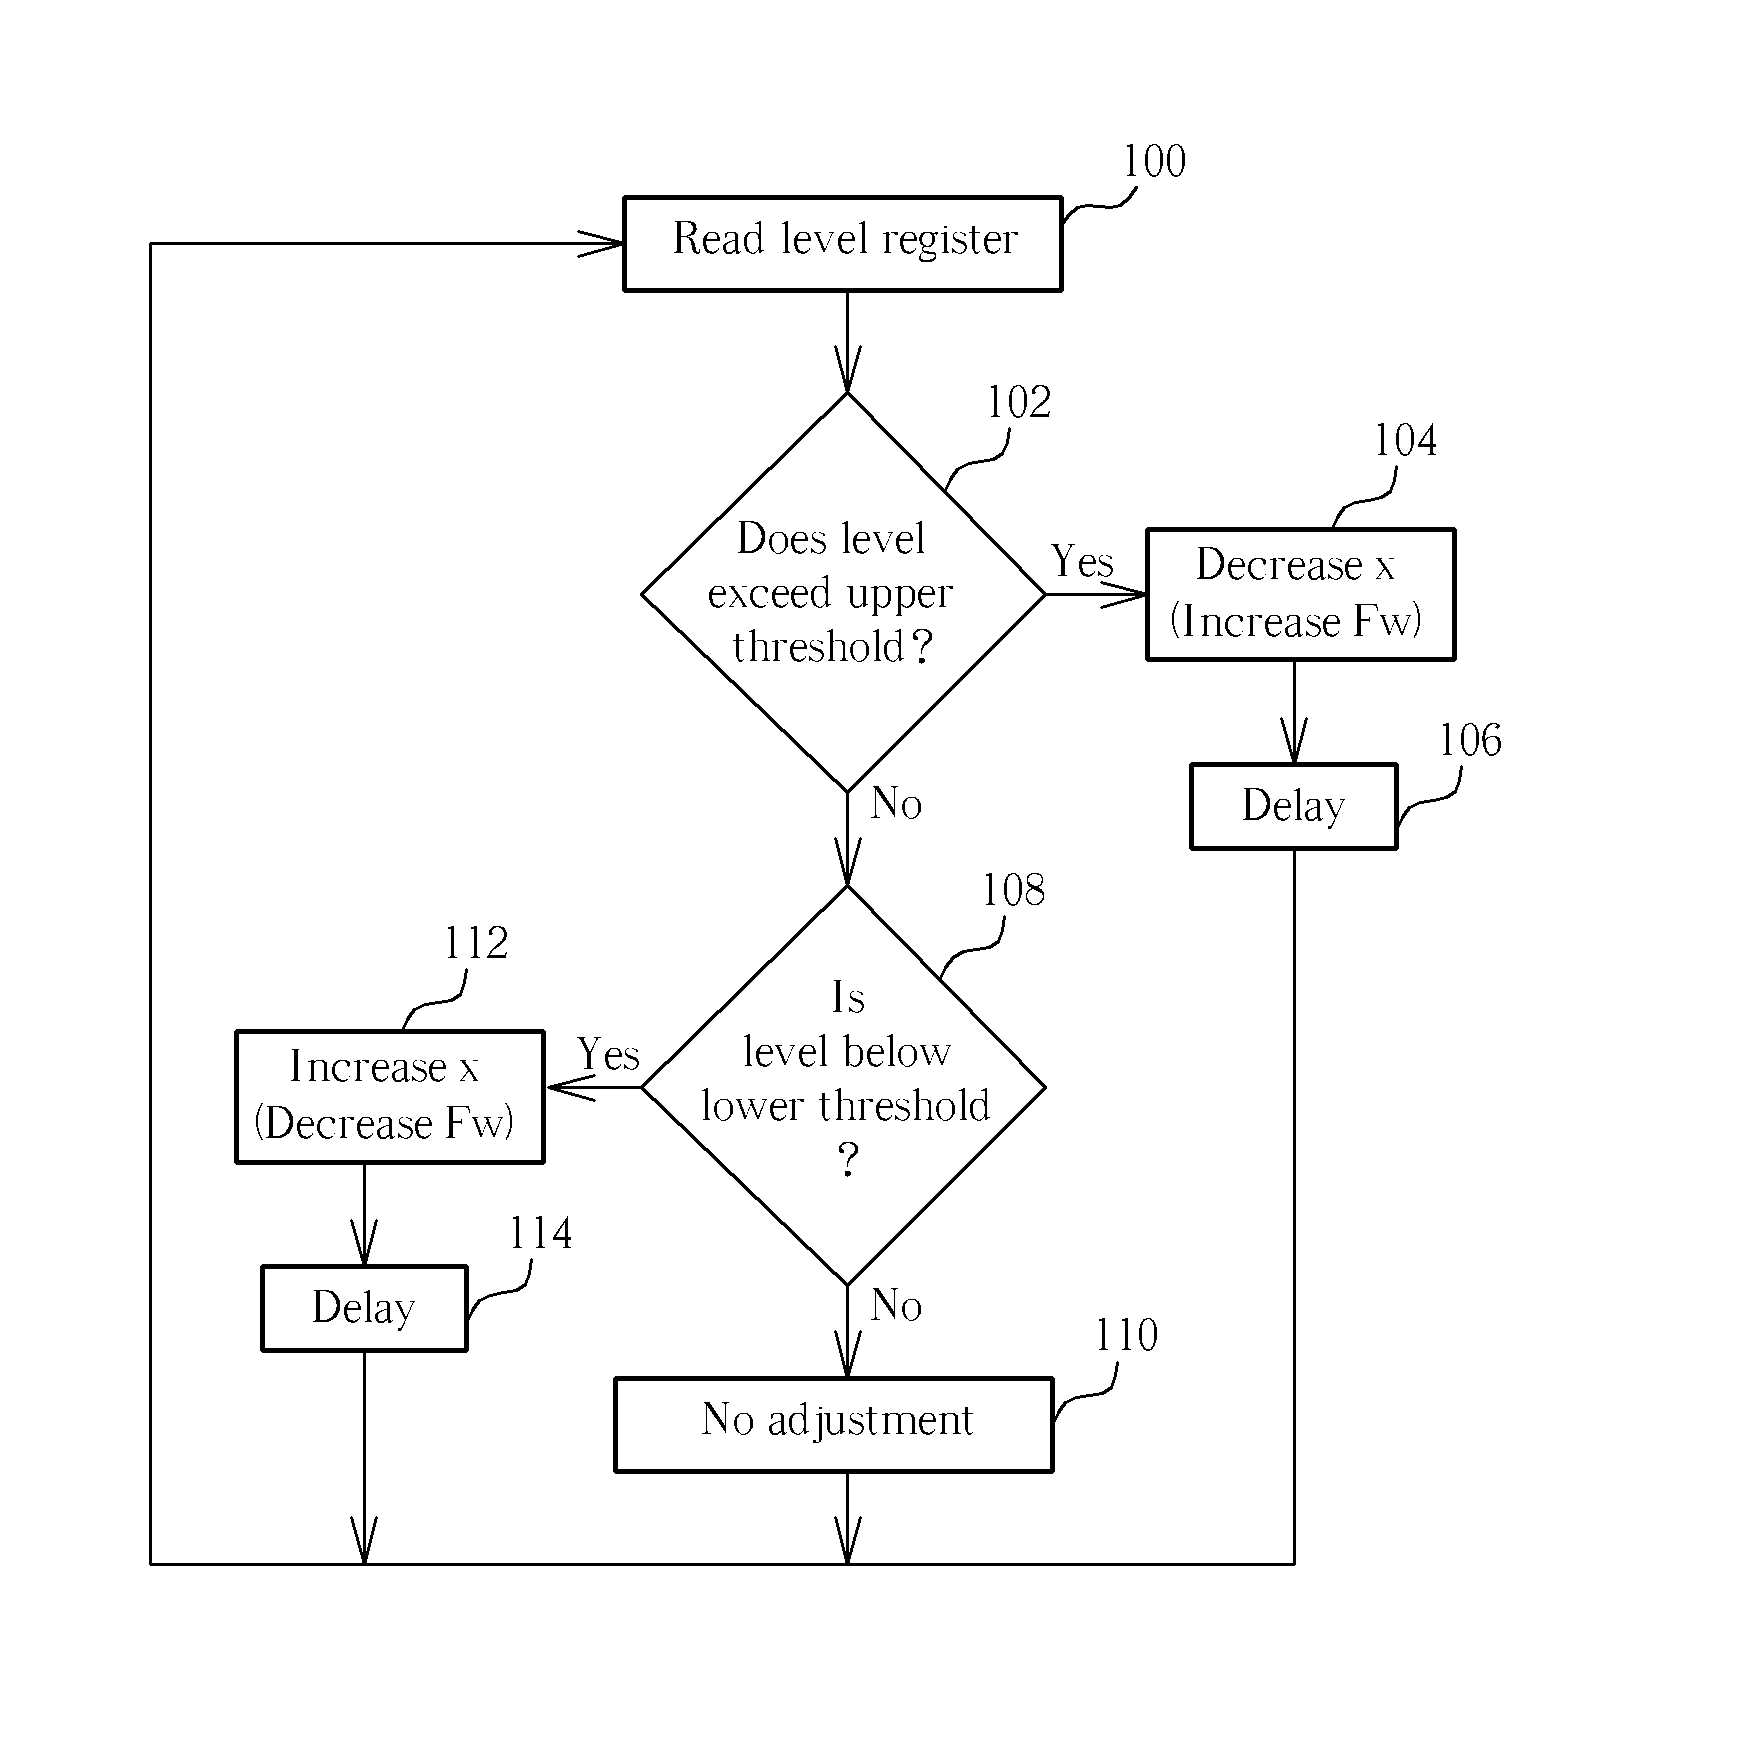 Method of Reducing Clock Differential in a Data Processing System